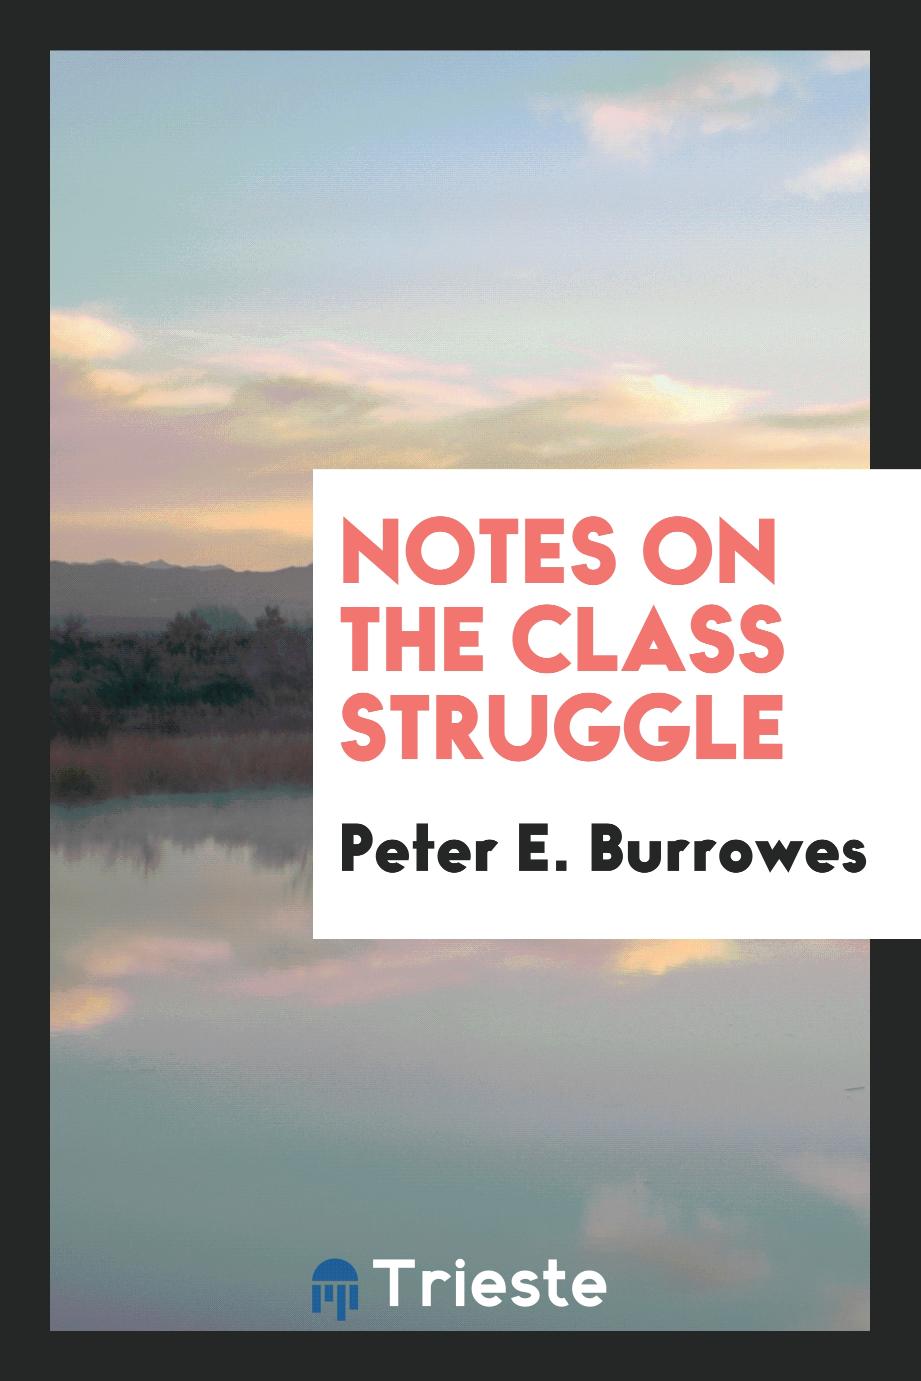 Notes on the Class Struggle